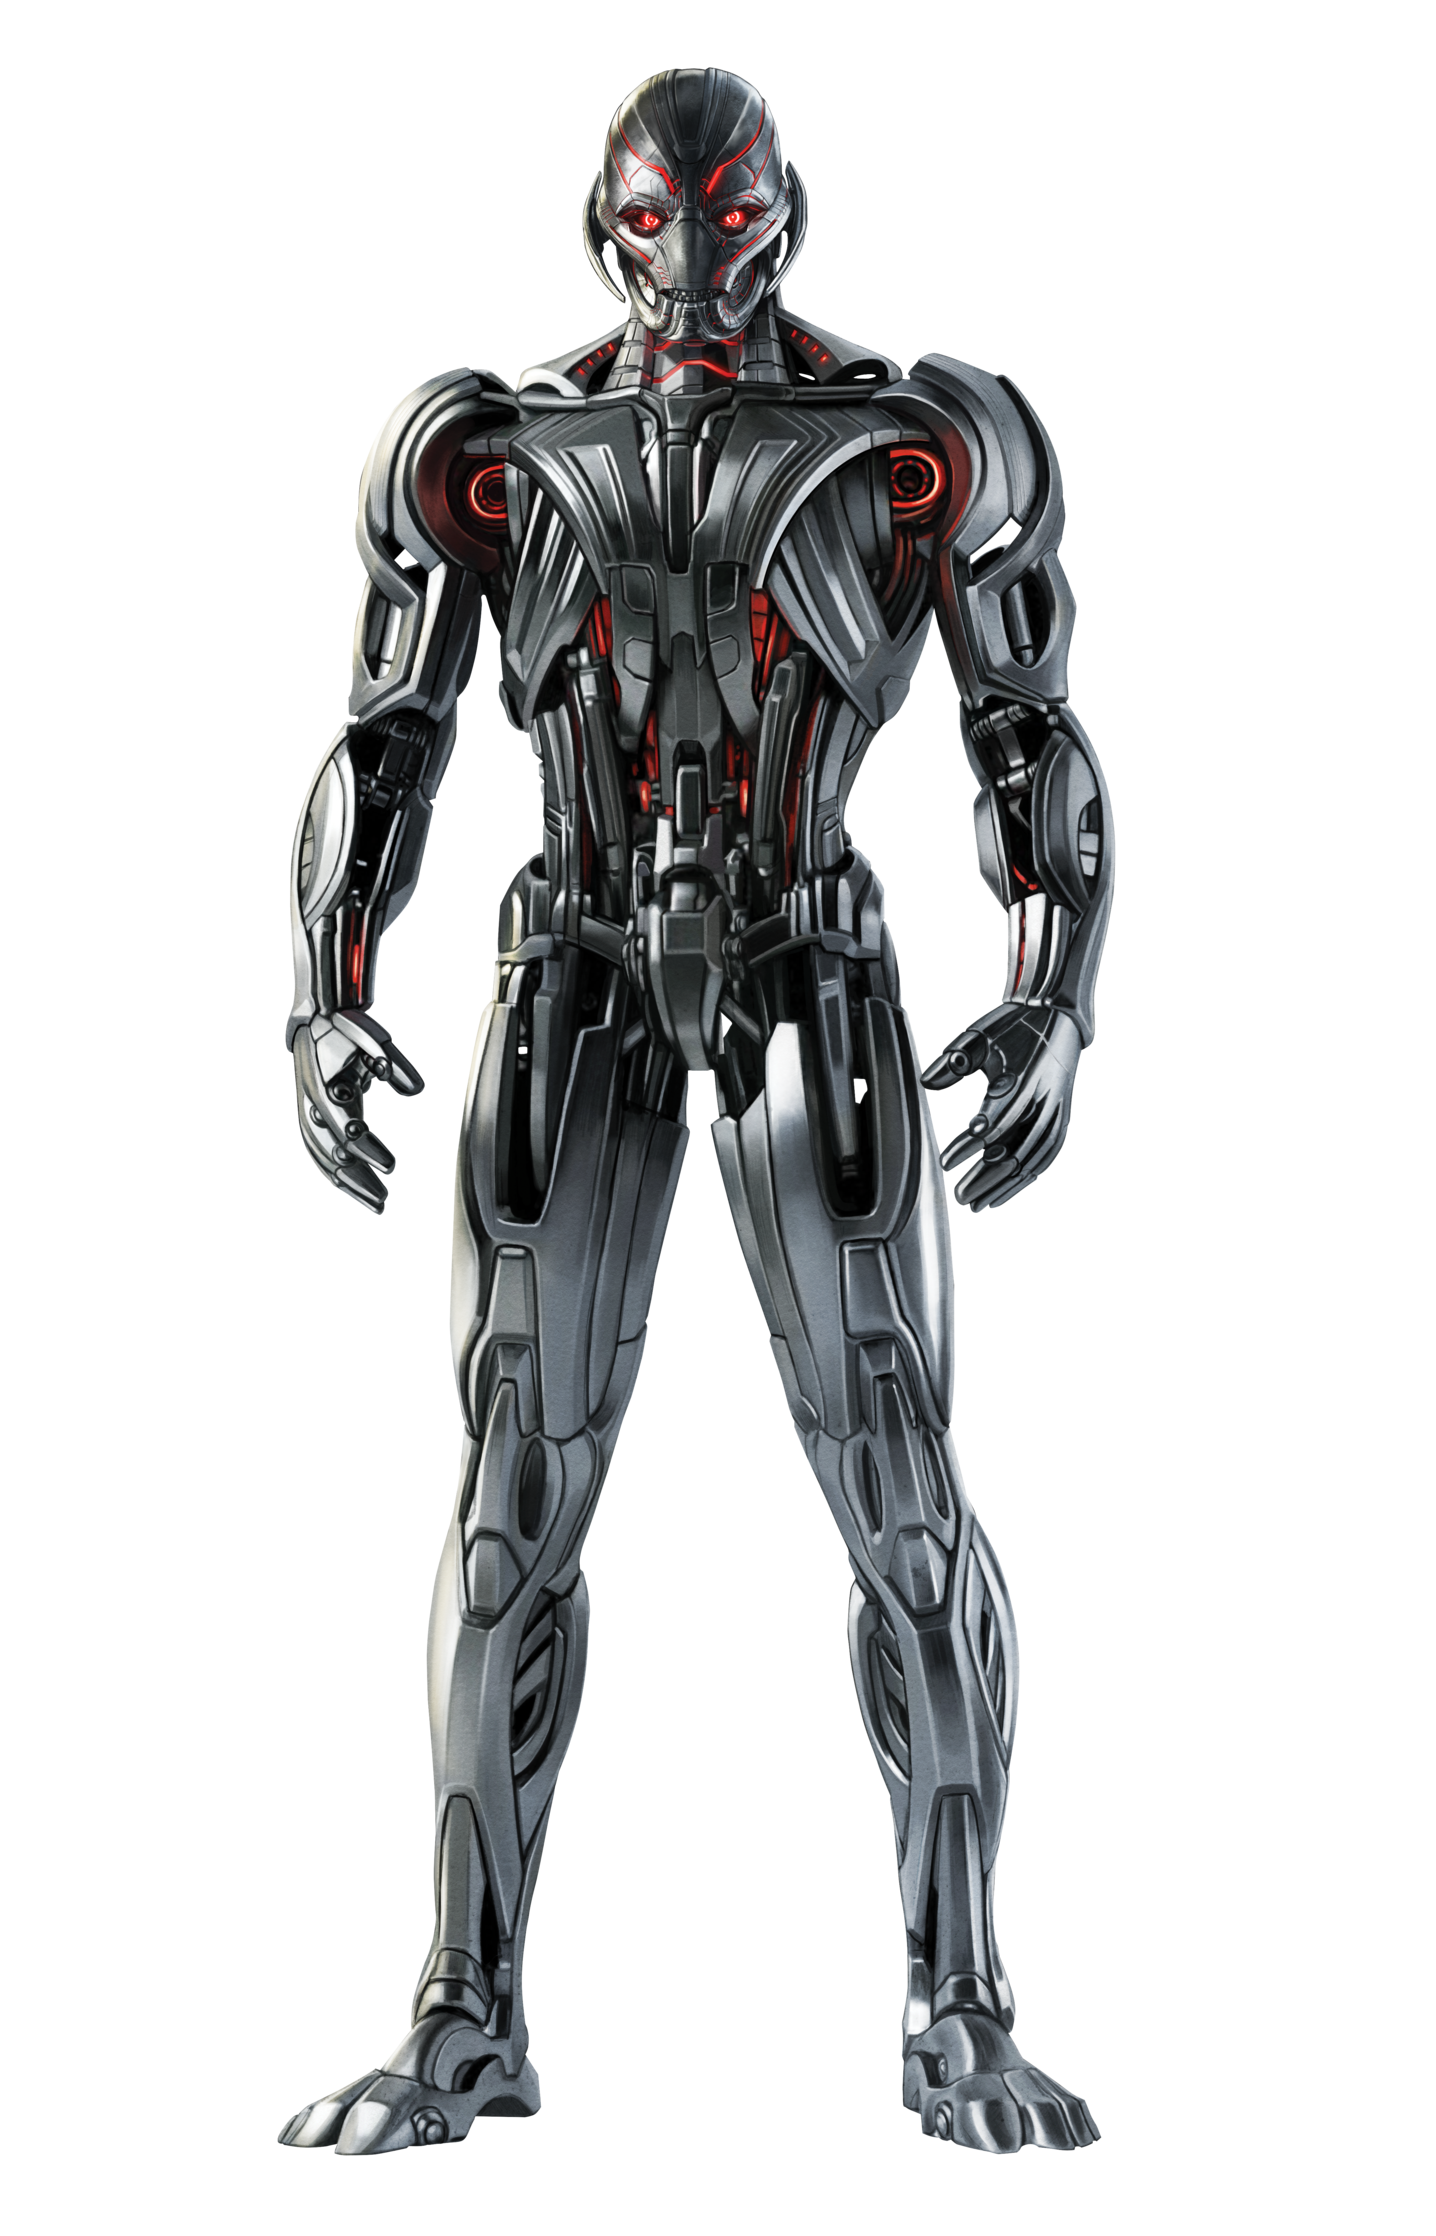 Download PNG image - Ultron PNG Image 